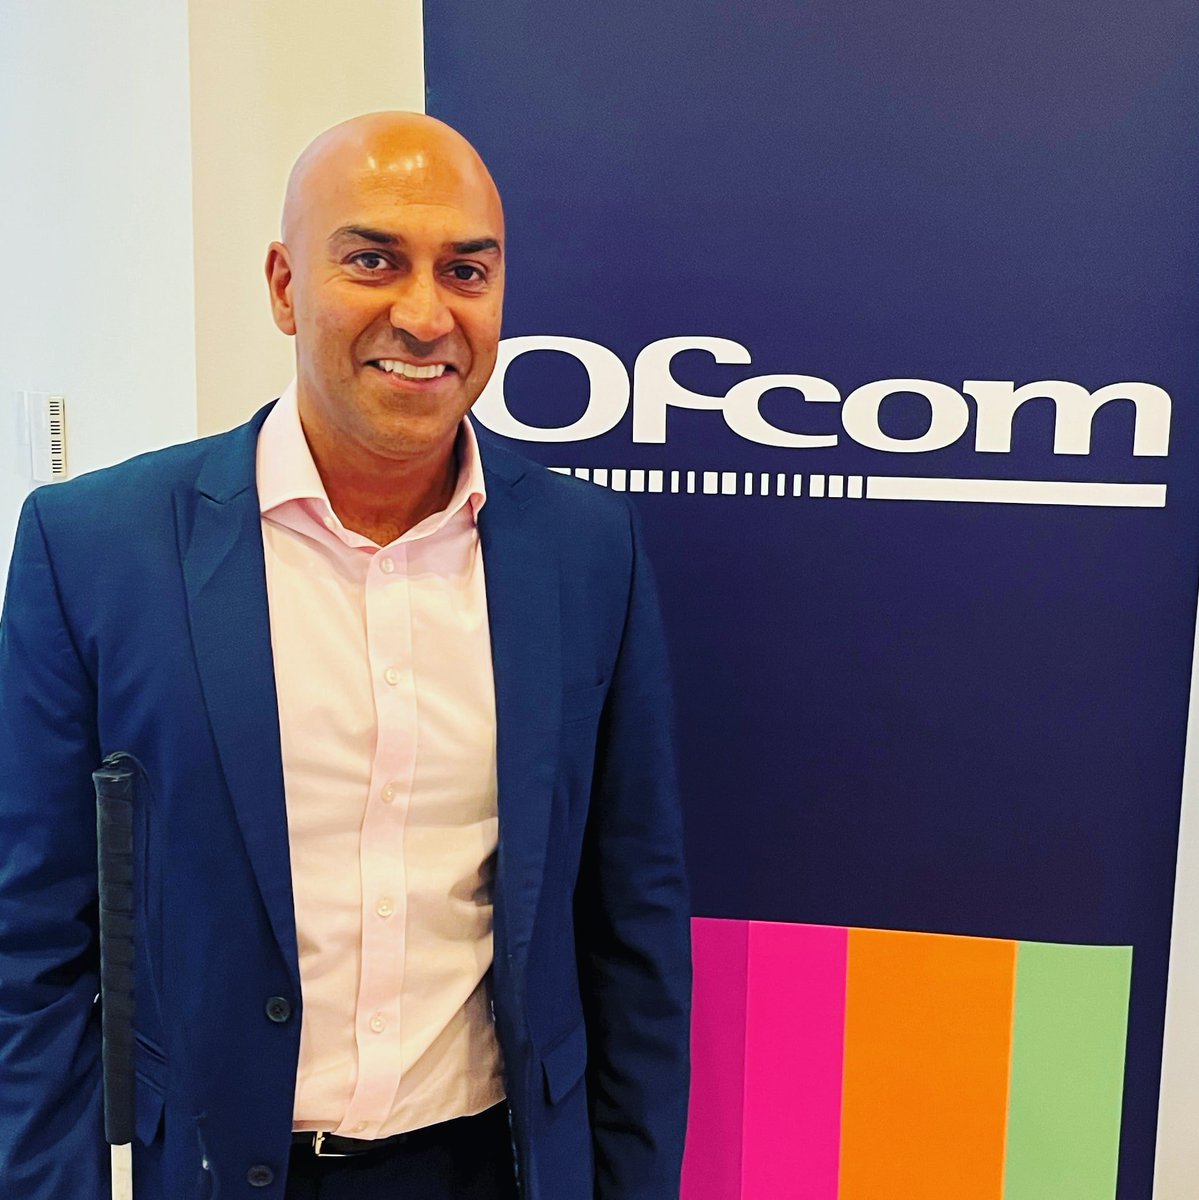 Just delivered a keynote speech at the @Ofcom conference about the power of #AudioDescription. It's not just about accessibility, it's about inclusivity and enriching experiences for all. Let's keep pushing for more inclusive media! #InclusionMatters #AccessibleMedia